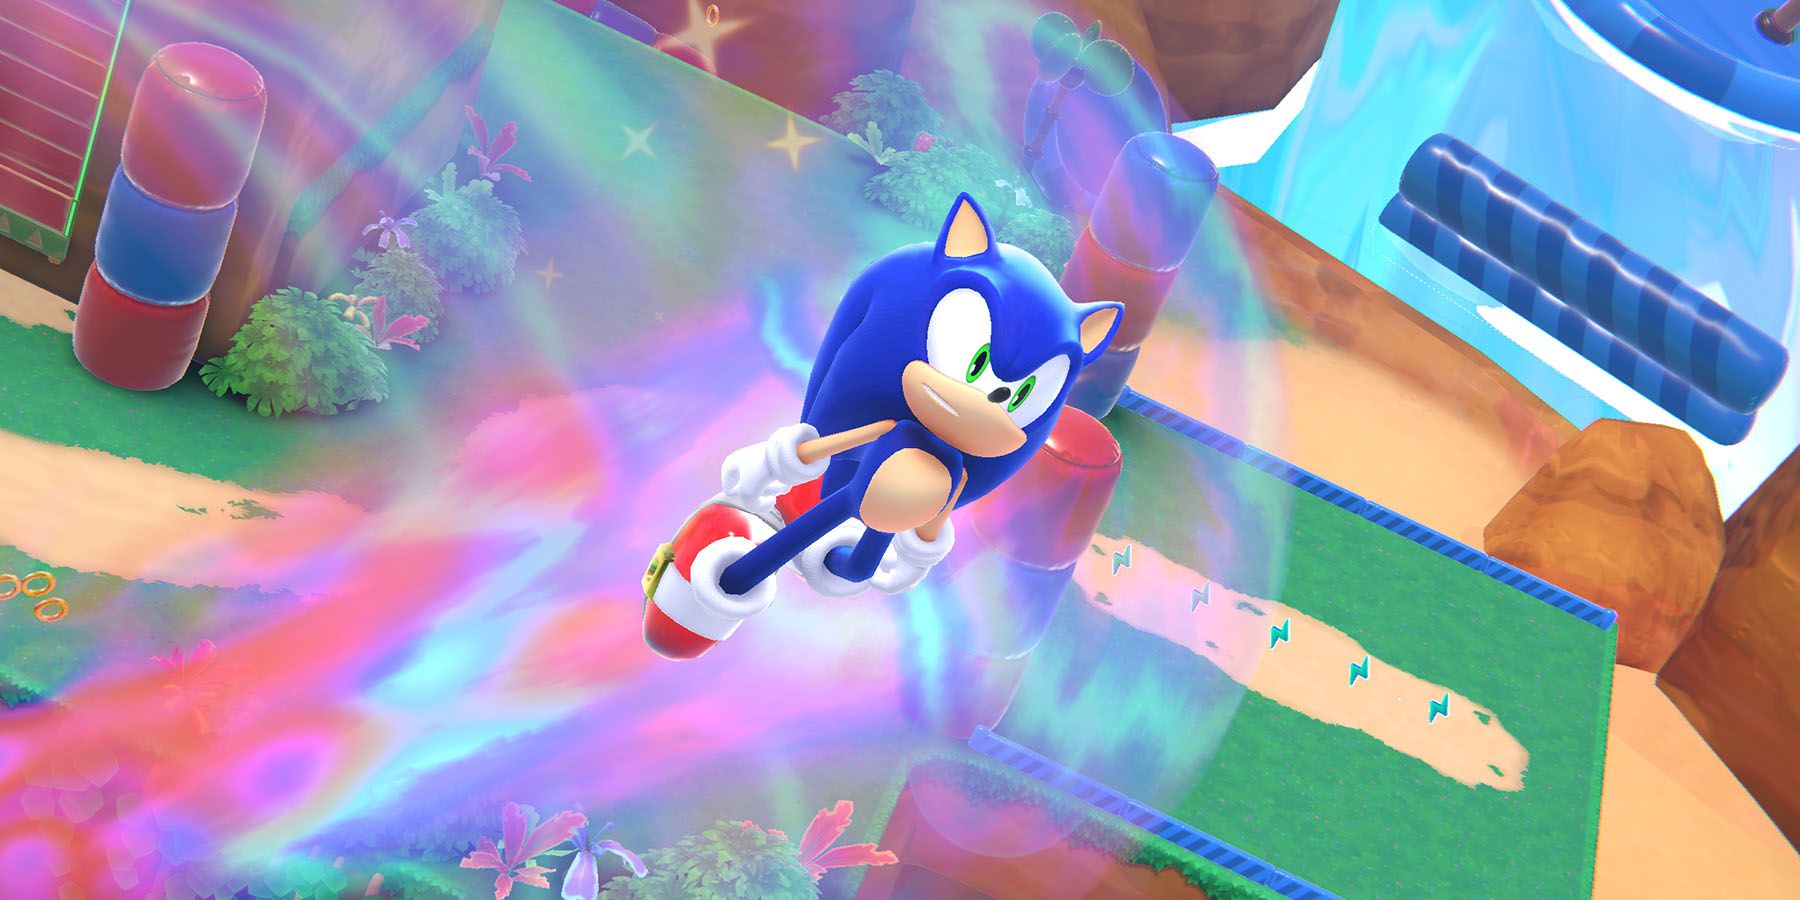 A screenshot of Sonic the Hedgehog blasting through the air above a colorful dream world in Sonic Dream Team.